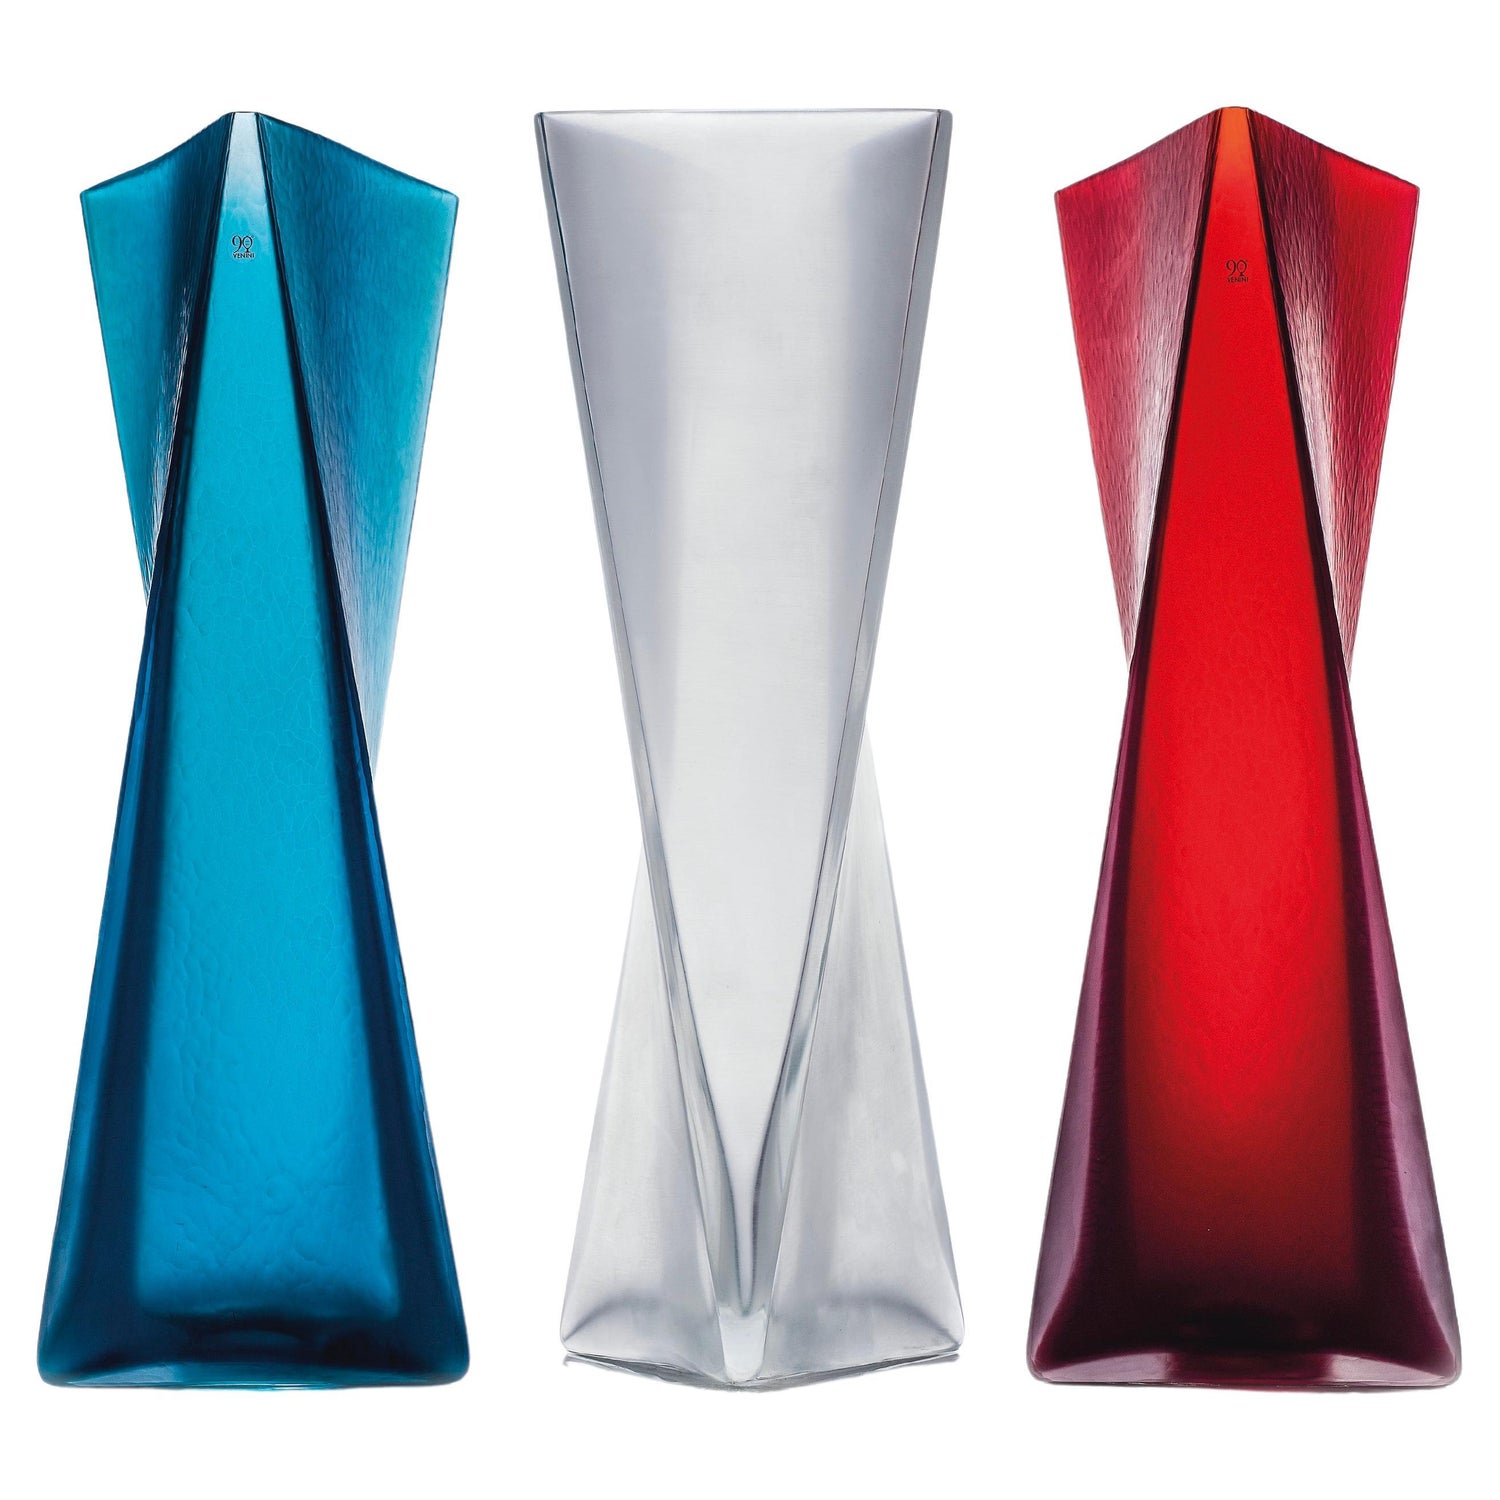 Limited Edition Set of 3 Monumental Murano Glass Vases by Tadao Ando For  Sale at 1stDibs